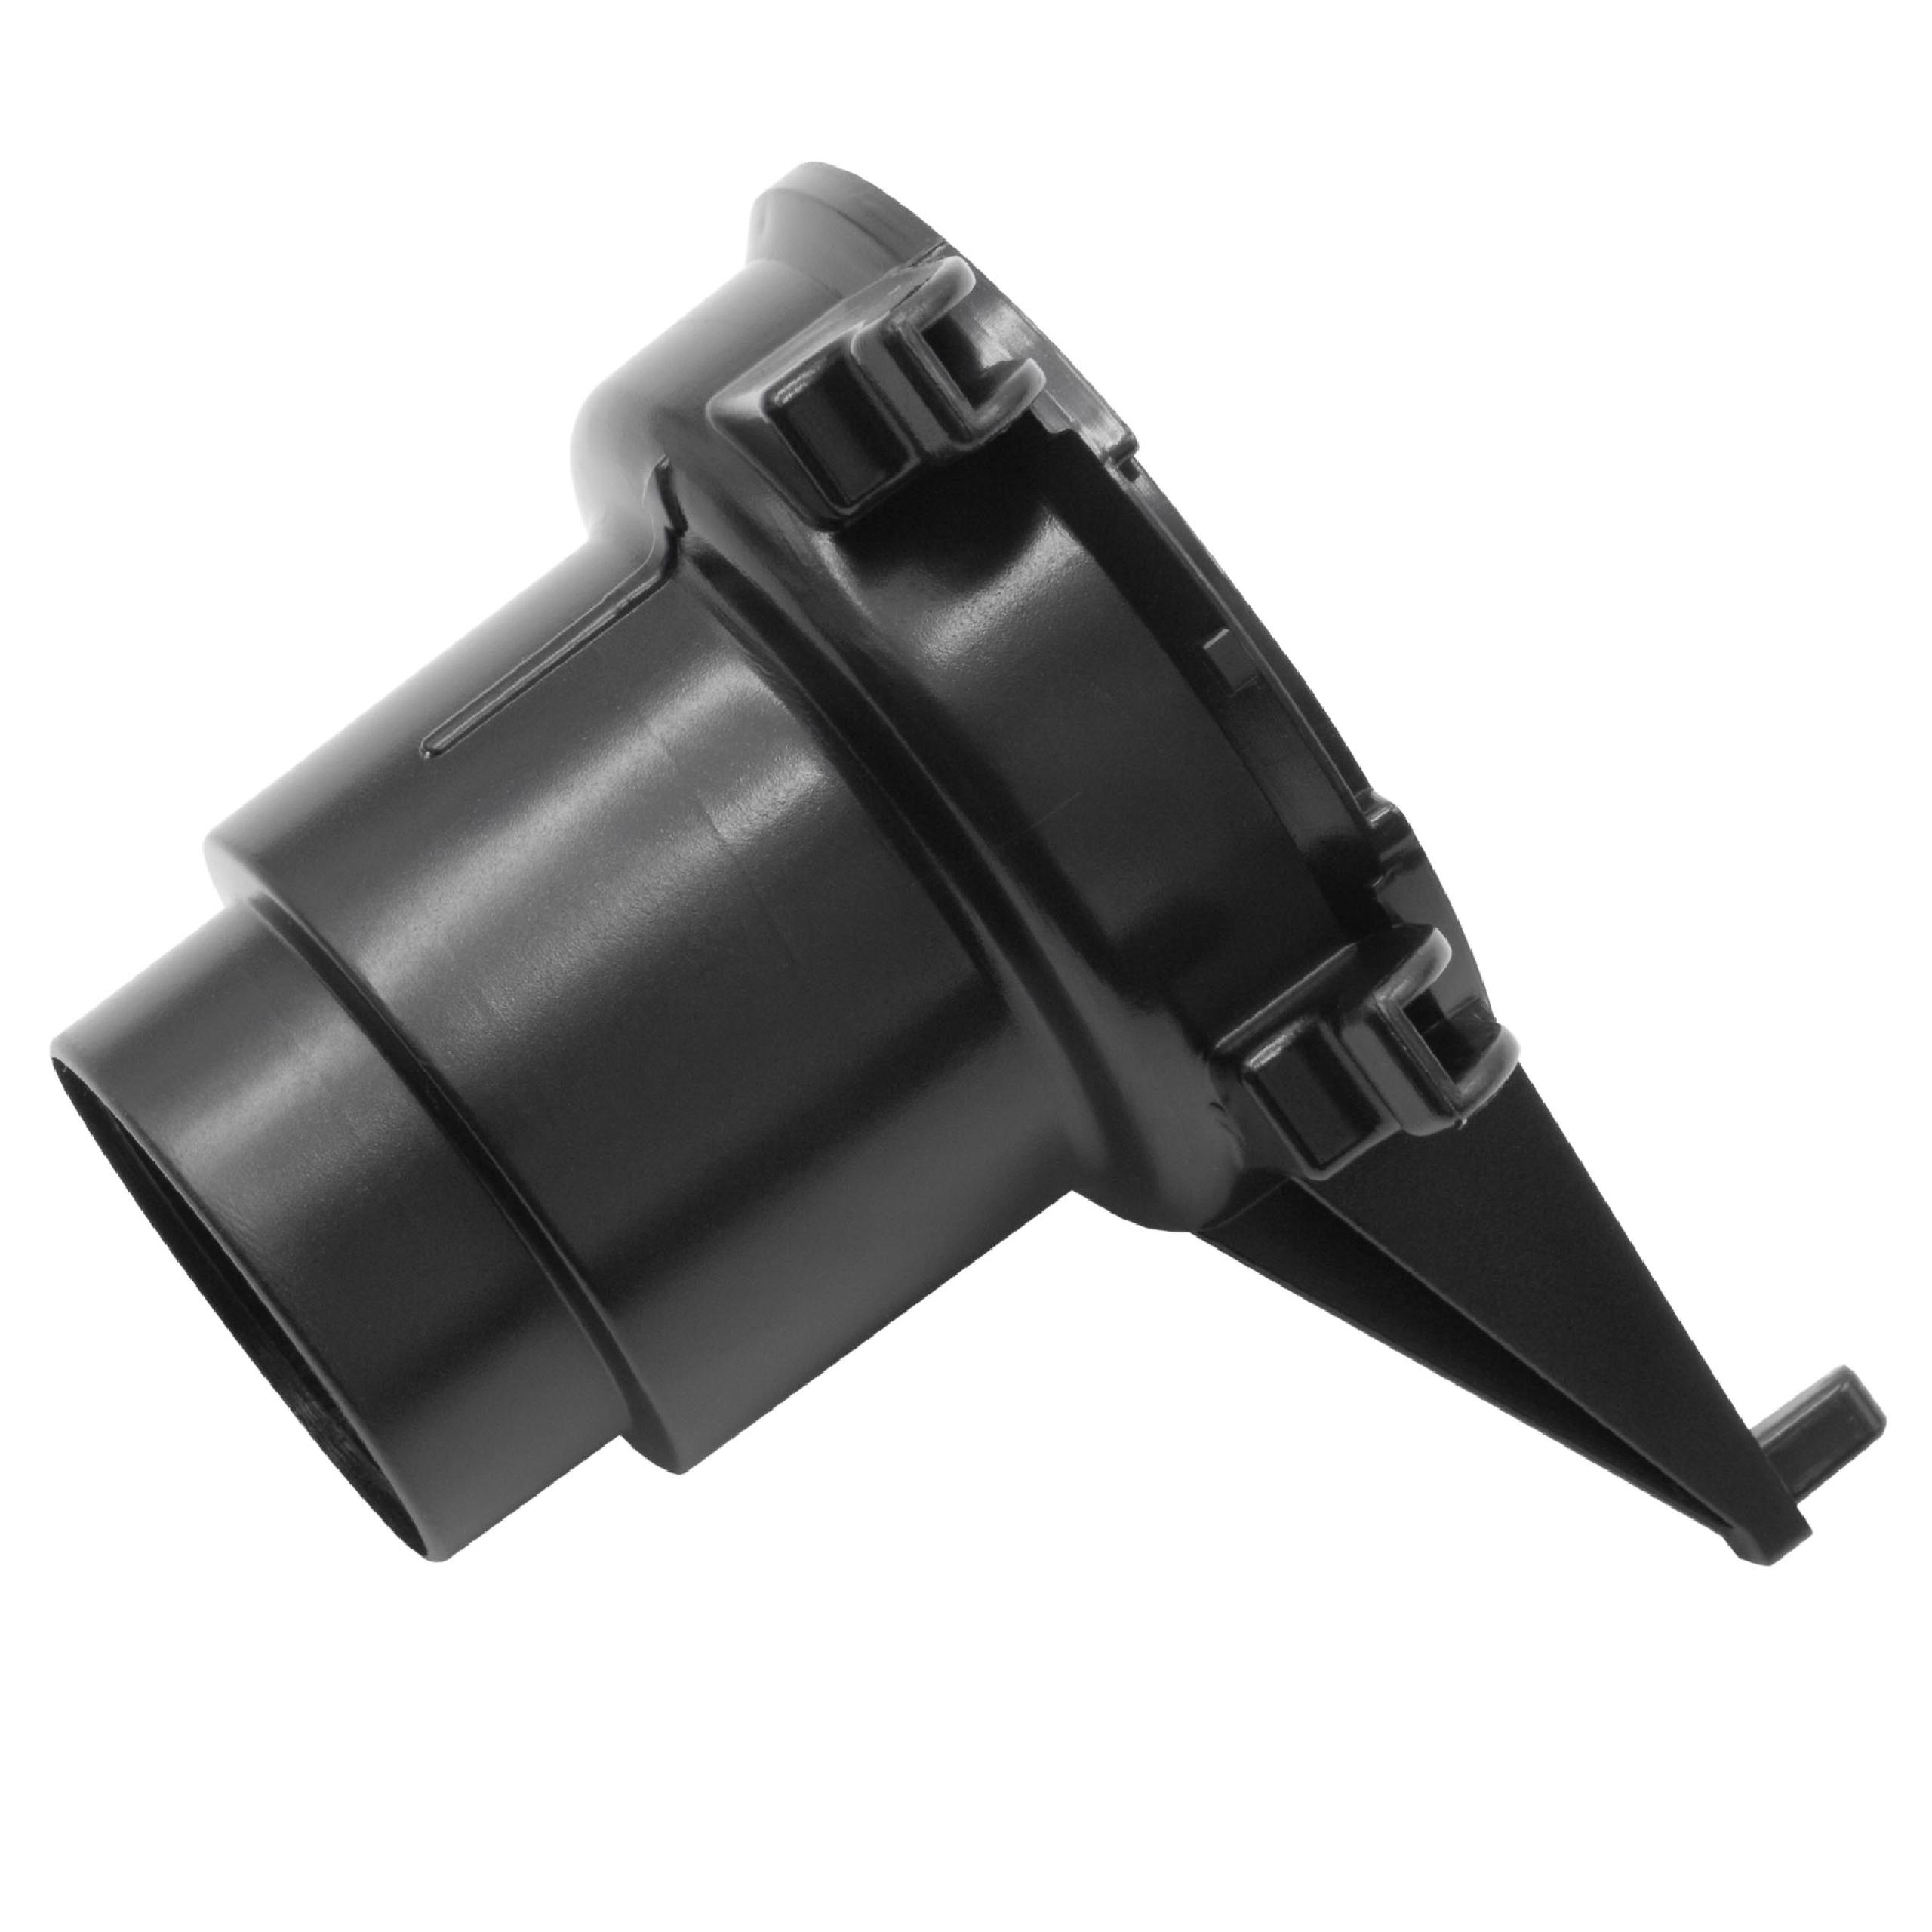 Hose Adapter for Ultimate Kirby Vacuum Cleaner - Plastic